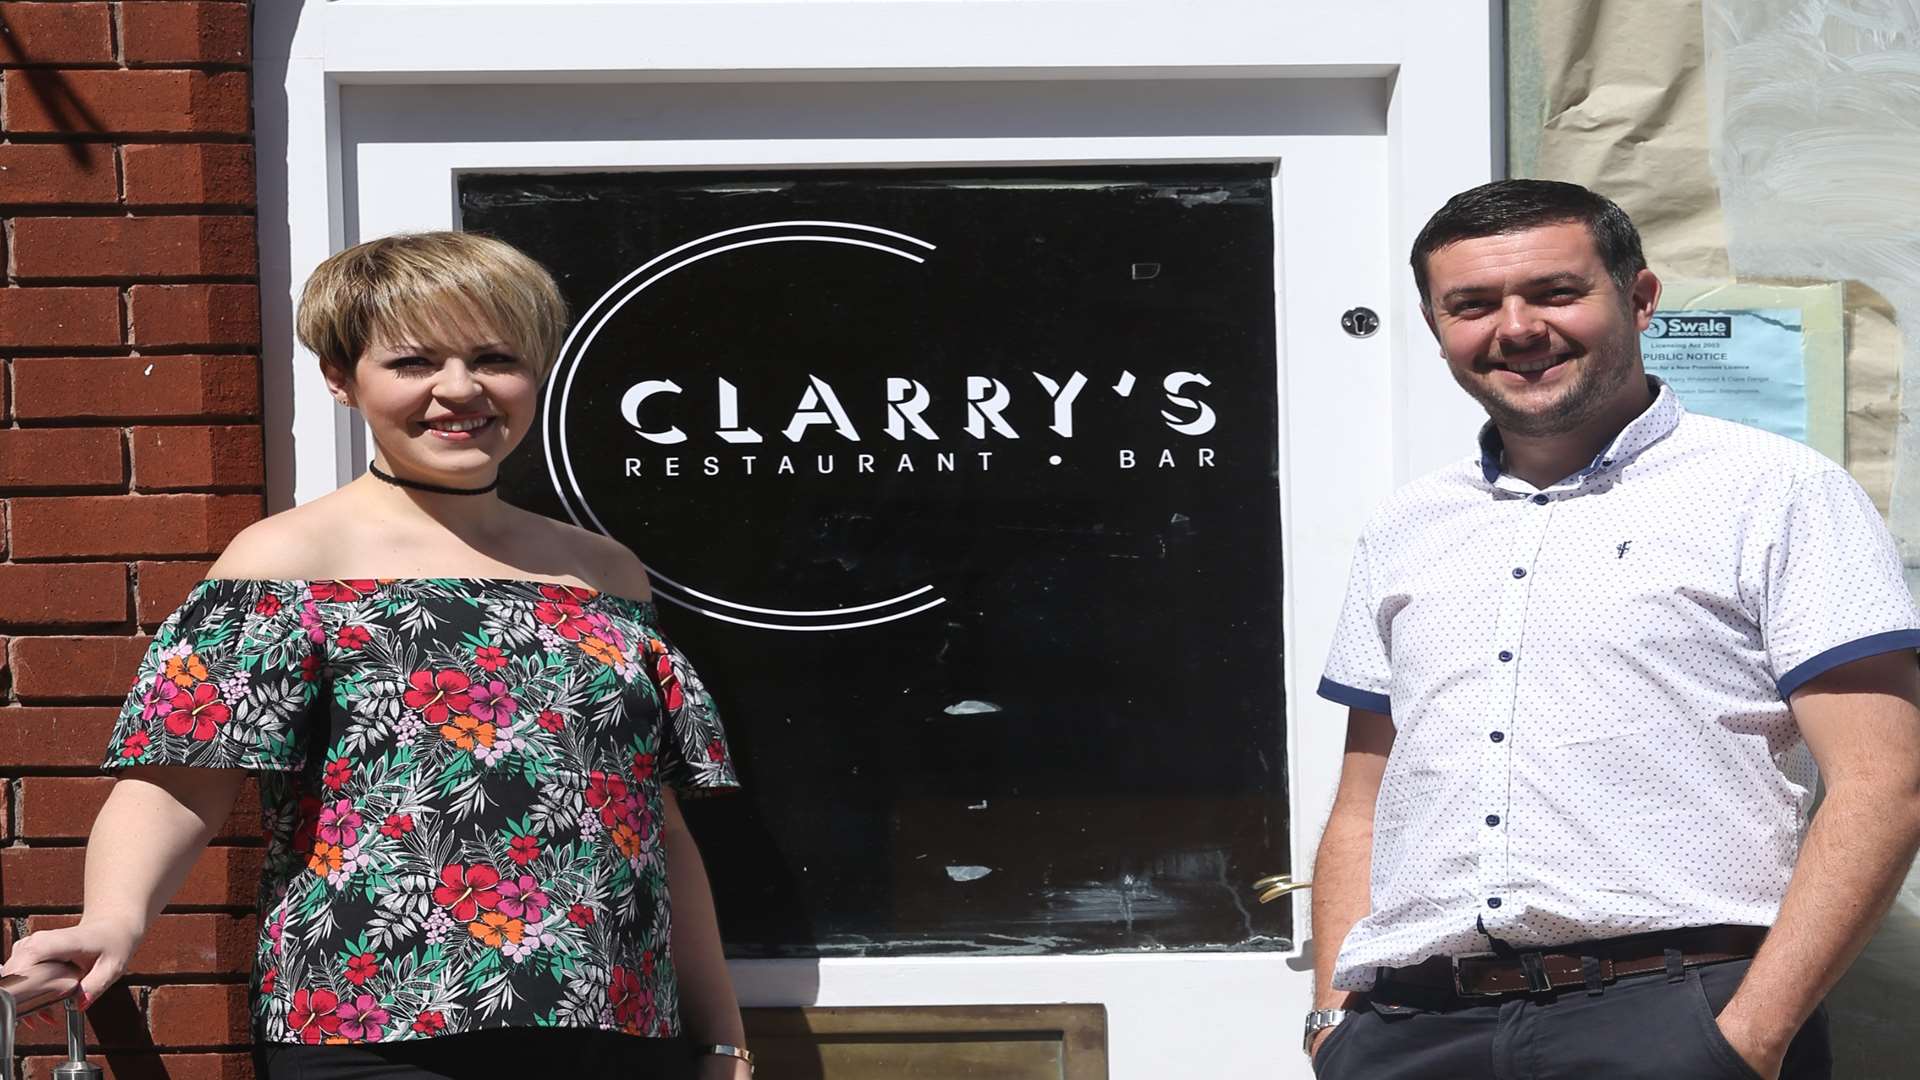 Claire Dangar and her partner Barry Whitehead are opening a new restaurant called Clarry's in Station Street